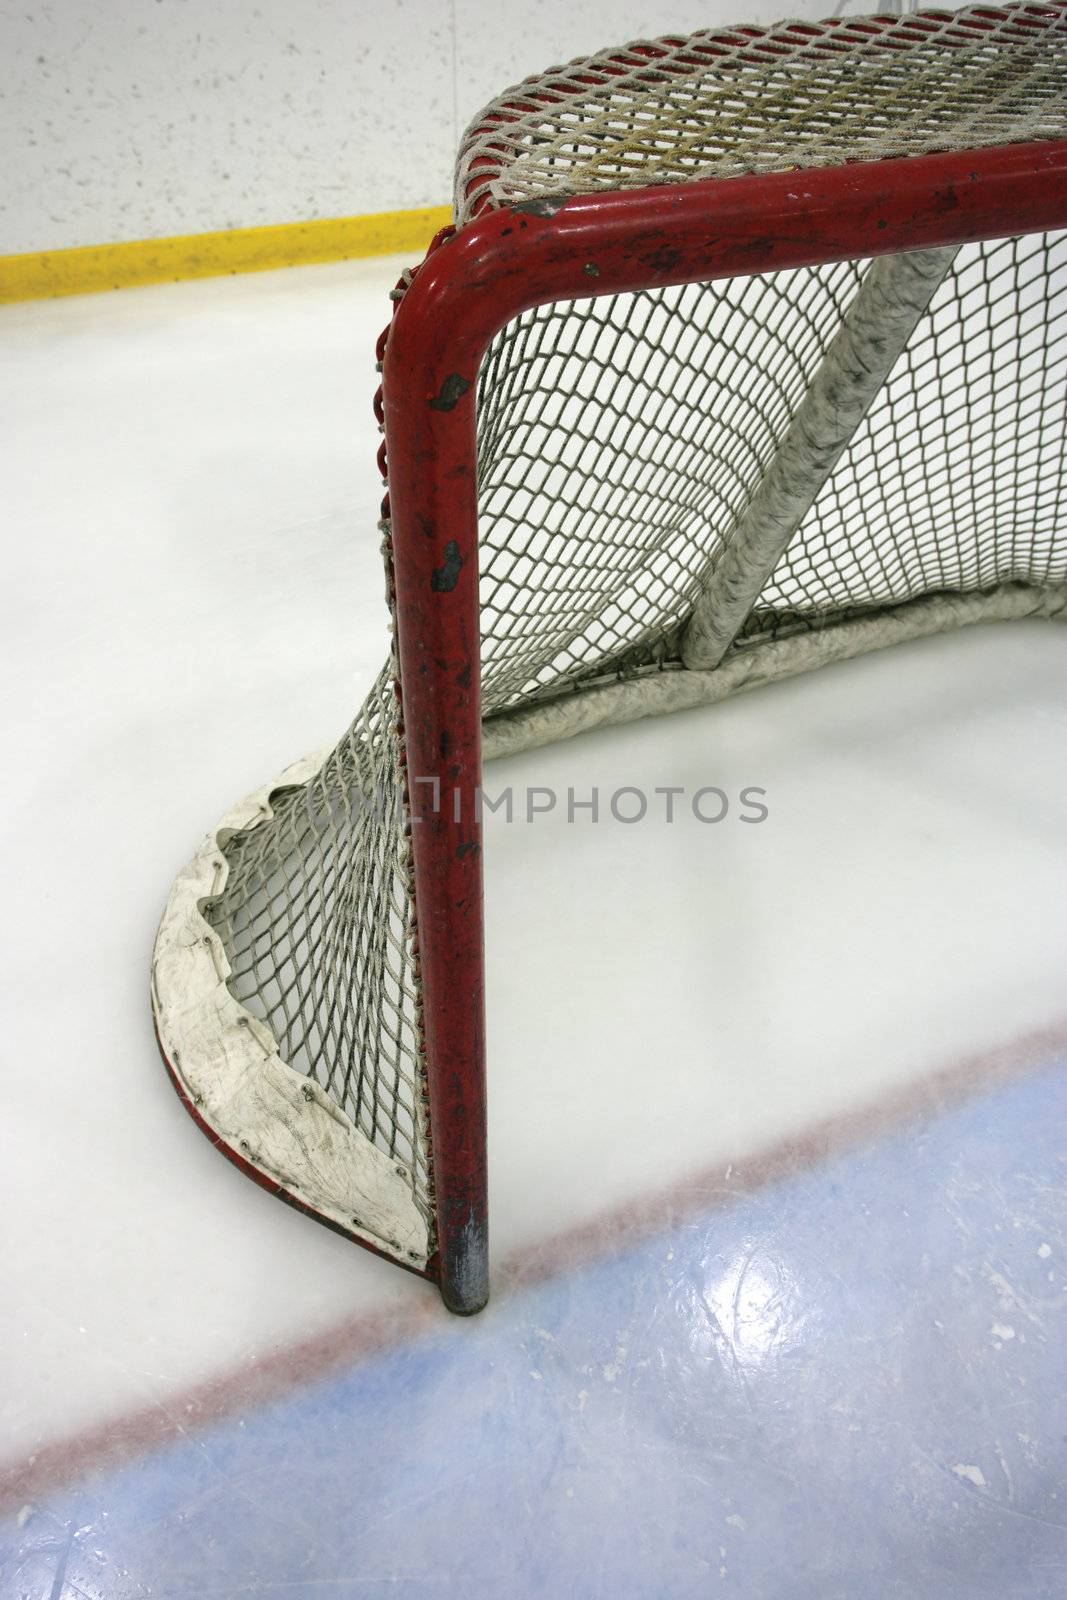 Goal post and net in a hockey arena
